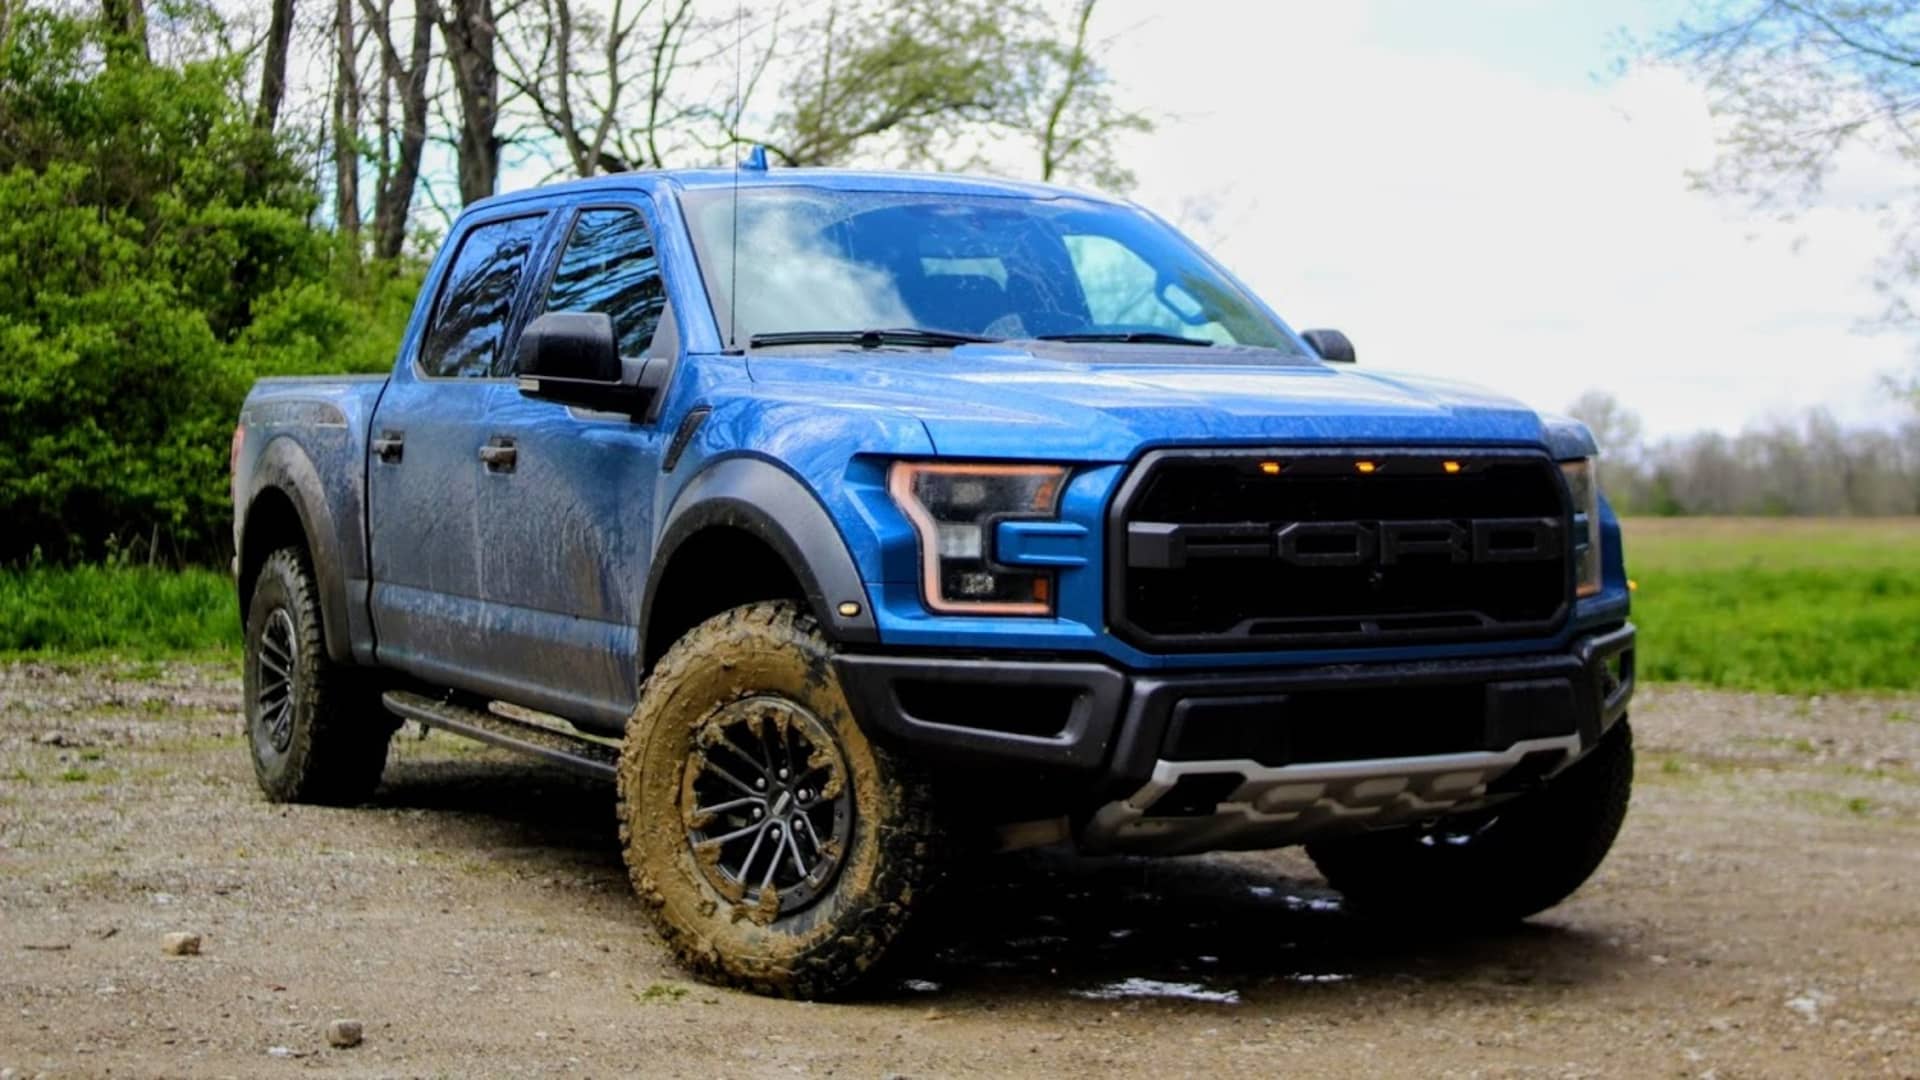 Review: The 2019 F-150 Raptor is Ford's most capable, fun 4X4